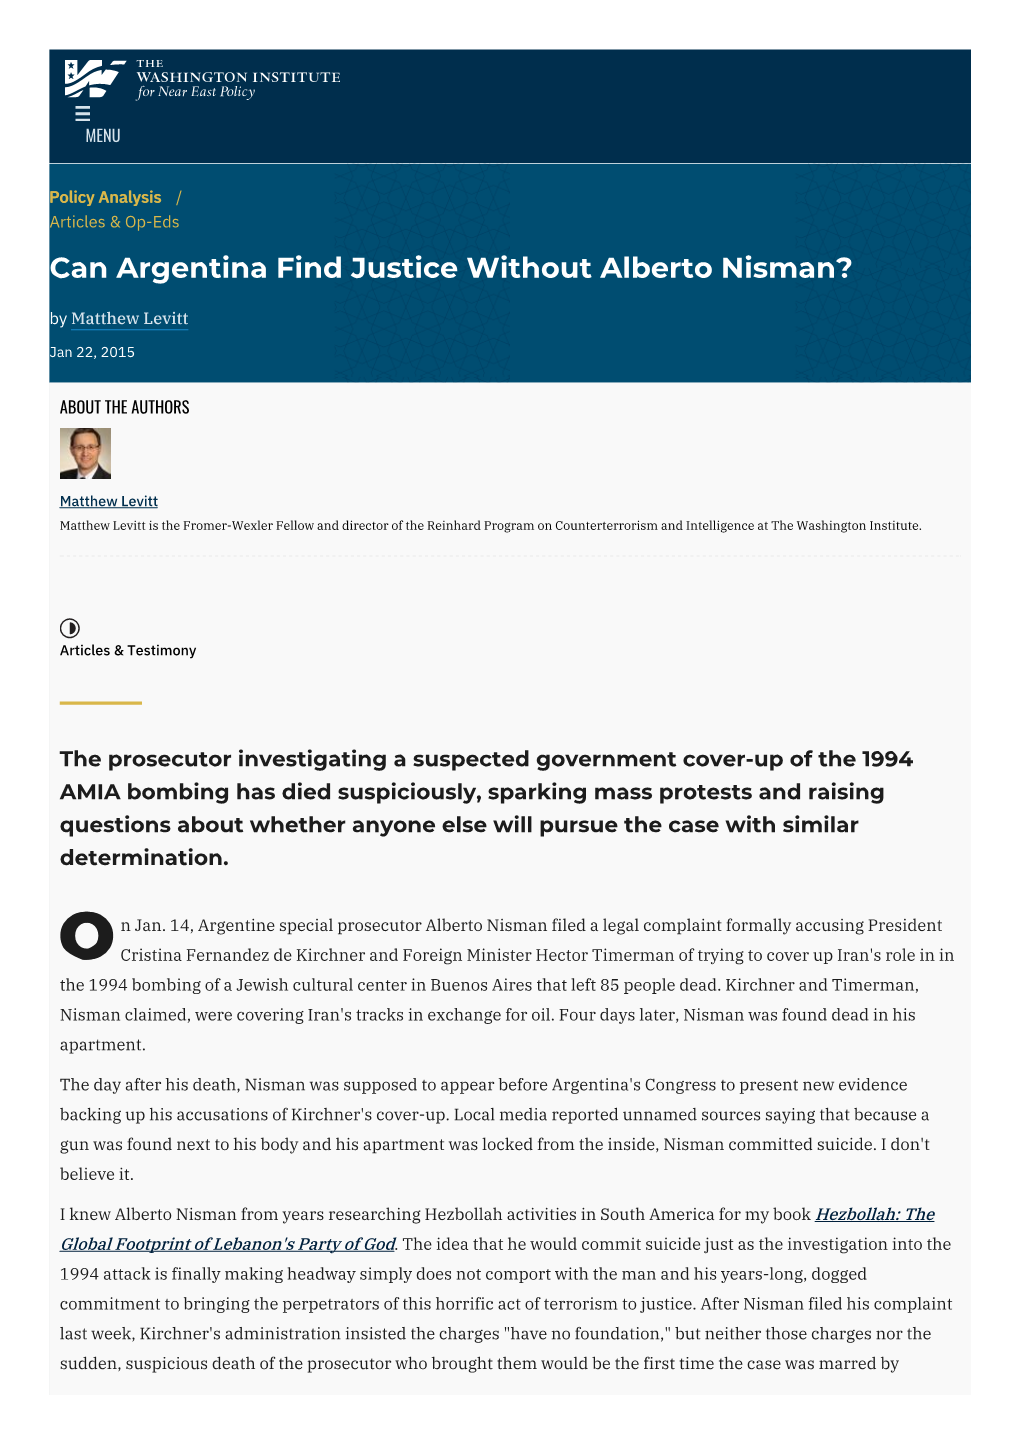 Can Argentina Find Justice Without Alberto Nisman? by Matthew Levitt